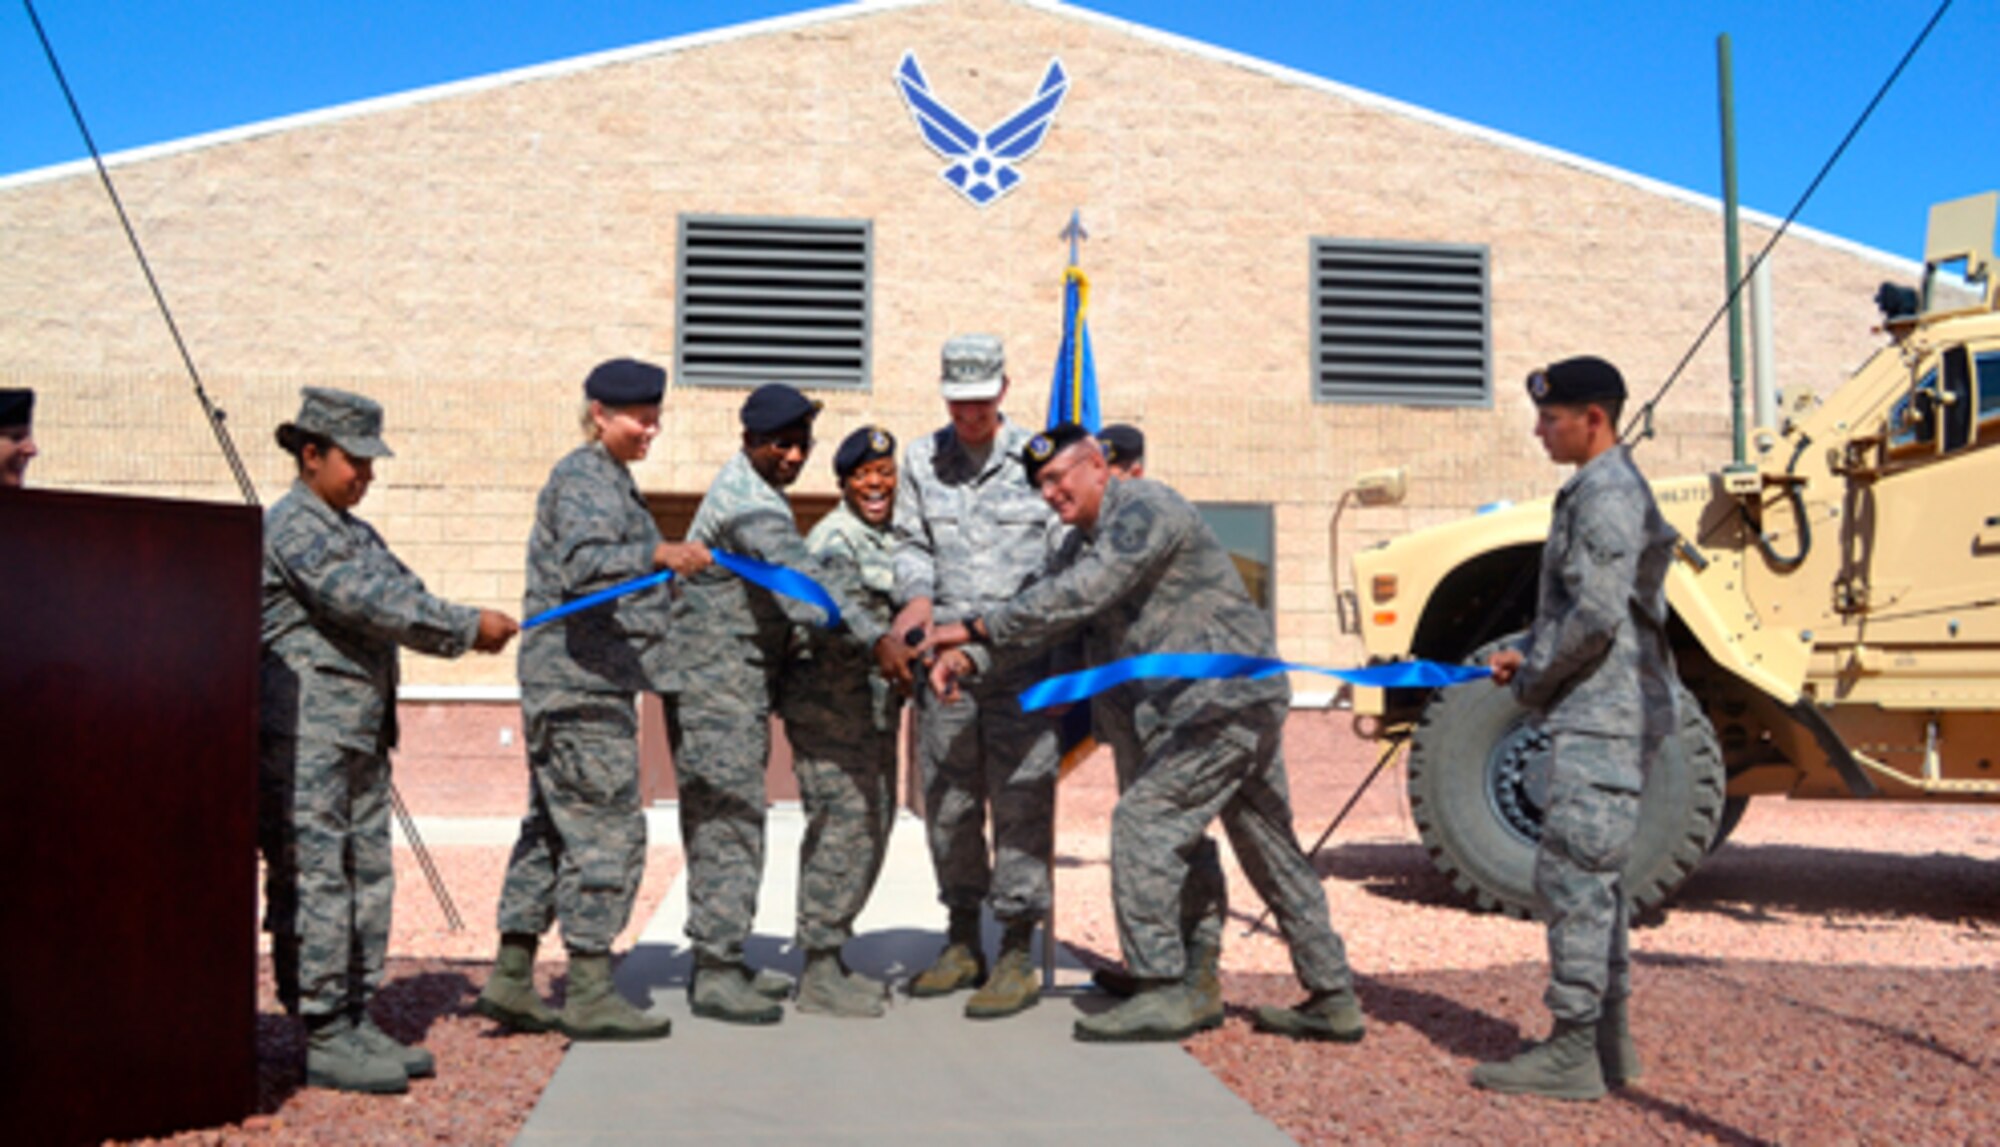 Air Force security forces now have one consolidated ground combat readiness center after the Desert Defender Ground Combat Readiness Training Center ribbon-cutting ceremony at Fort Bliss, Texas, July 3, 2014., All Air Force security forces, be they active-duty Air Force, Air Reserve Command or Air National Guard, will use the center. Air Force officials partnered with the U.S. Army, and specifically the 1st Armored Division, to create the center. (Courtesy photo)
 